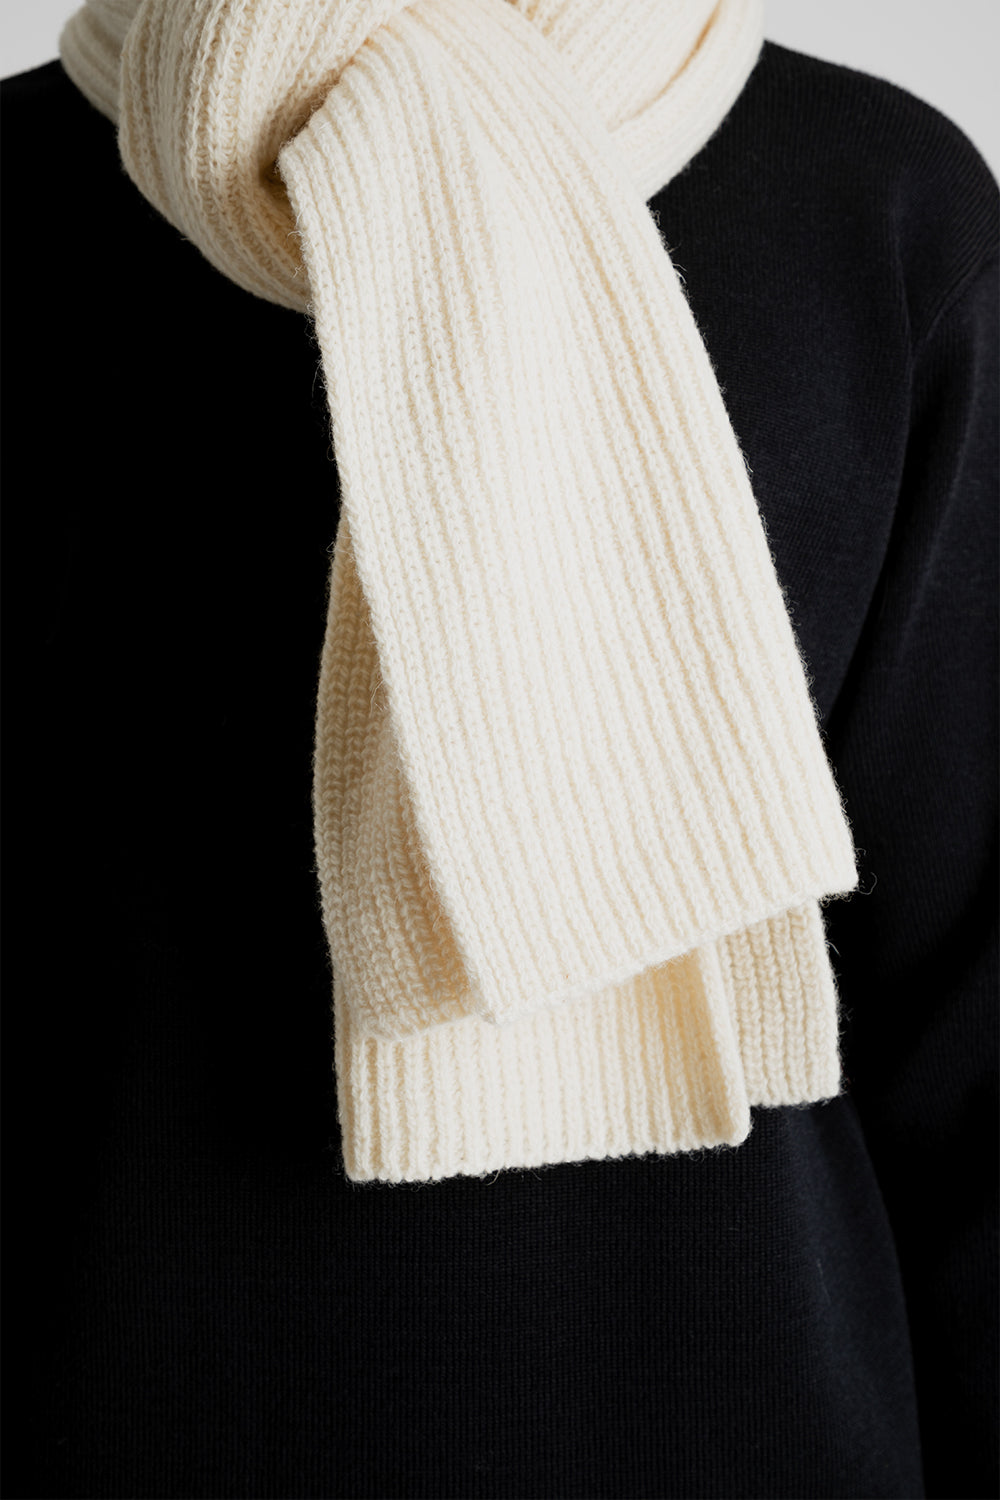 Parages Anton Shetland Scarf in Off White